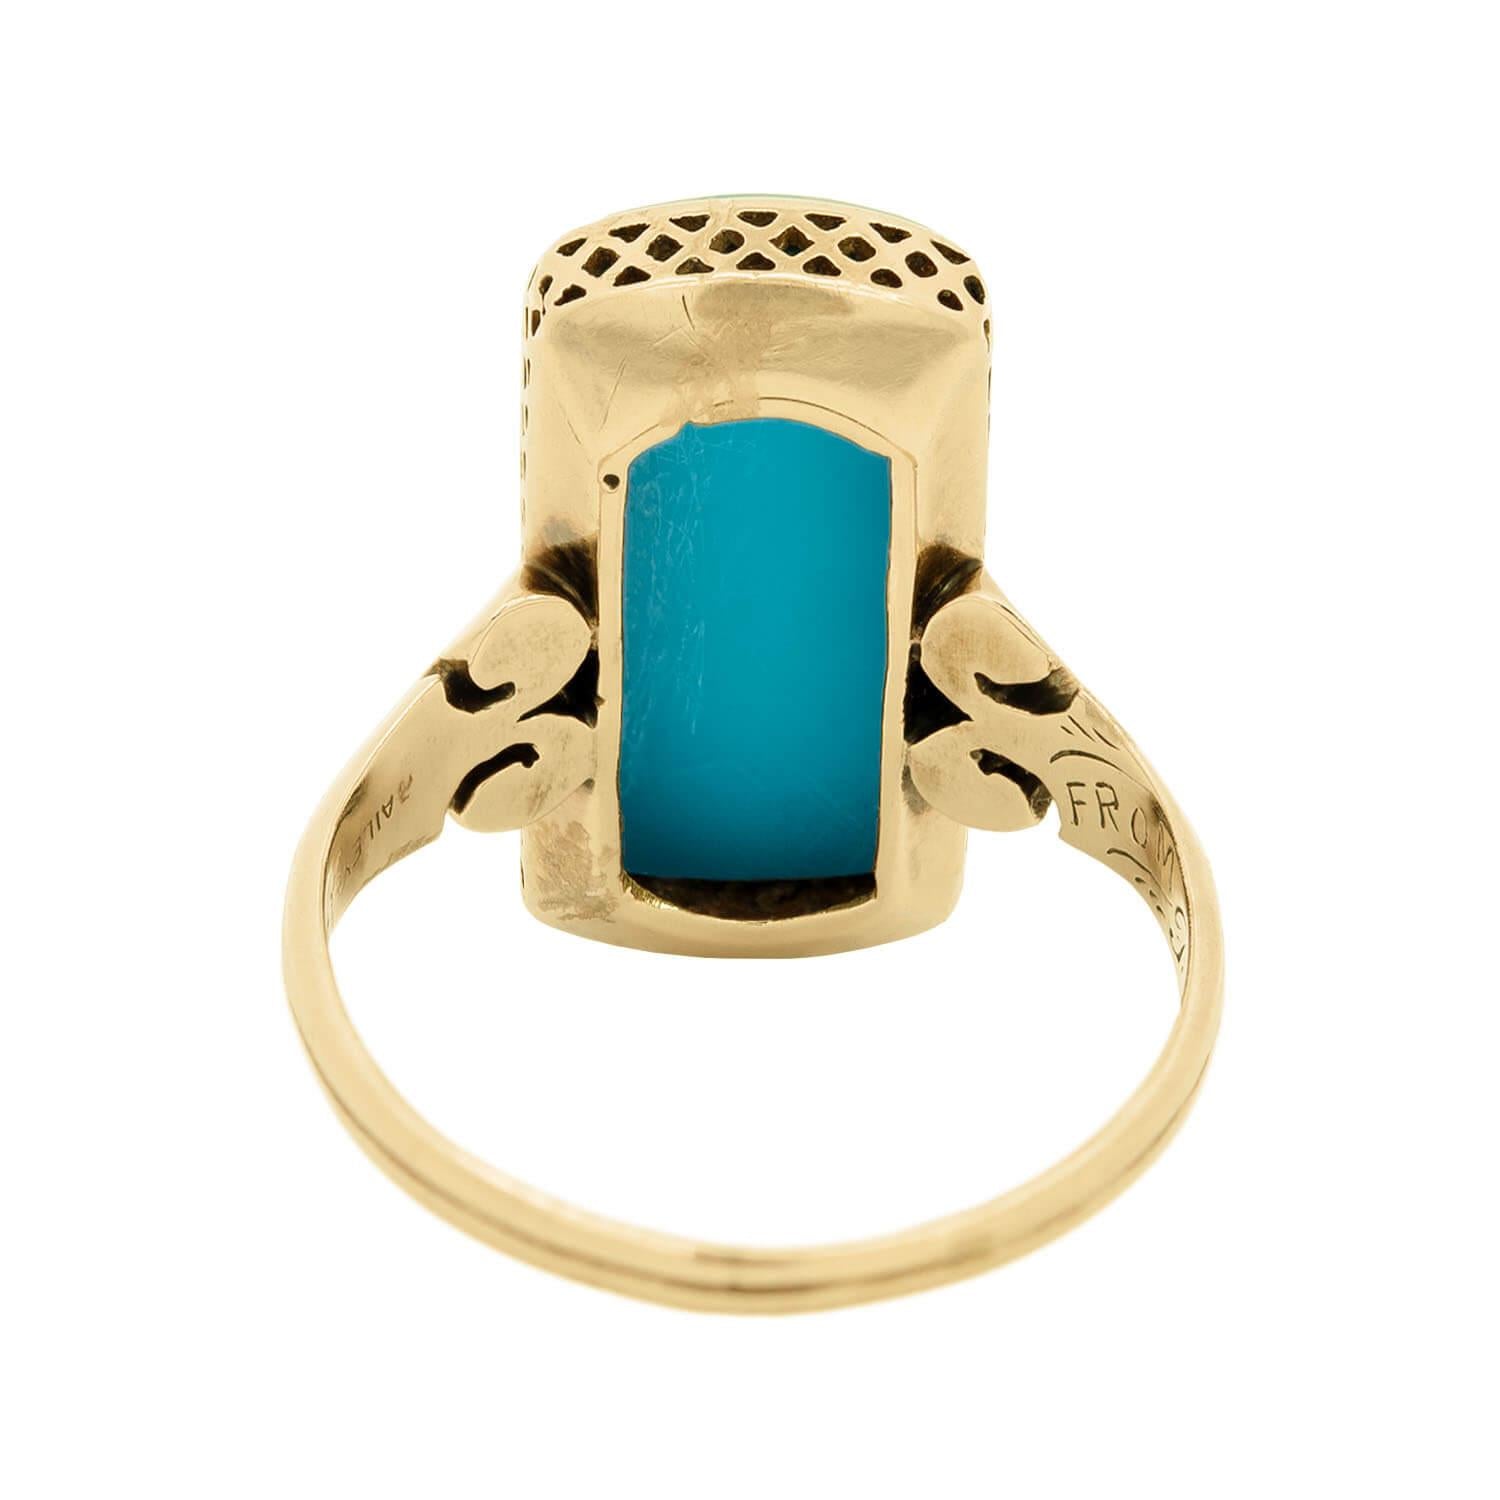 BAILEY BANKS & BIDDLE Victorian 14k Turquoise Ring